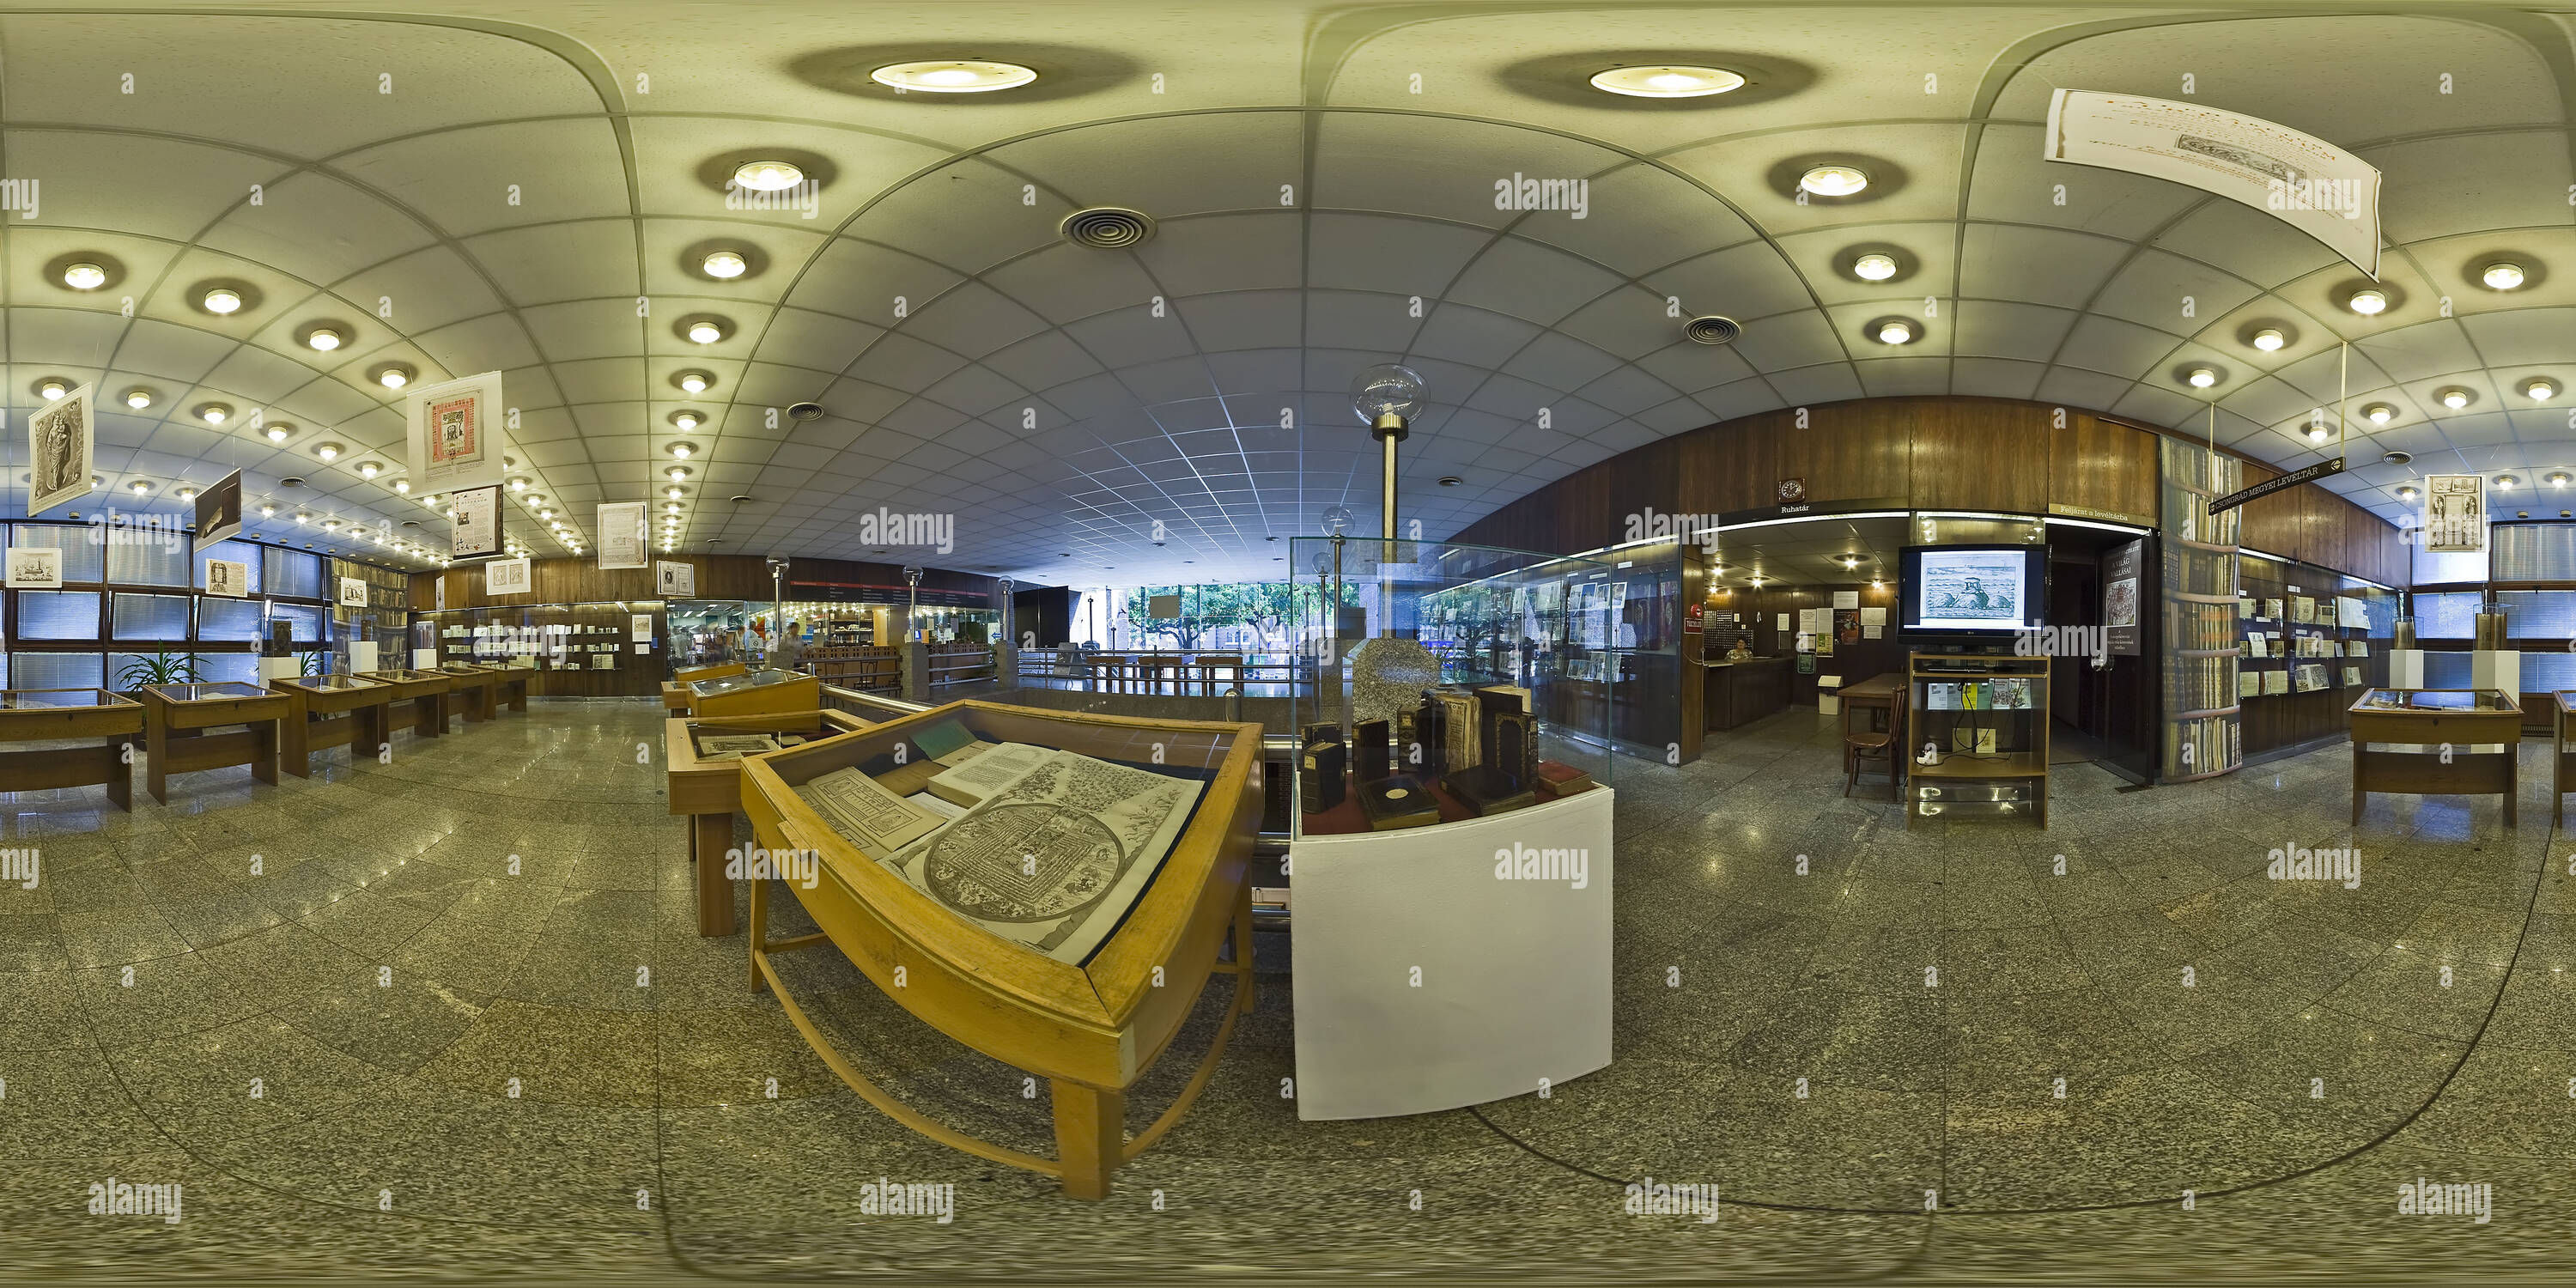 360 degree panoramic view of Somogyi library foyer exhibition